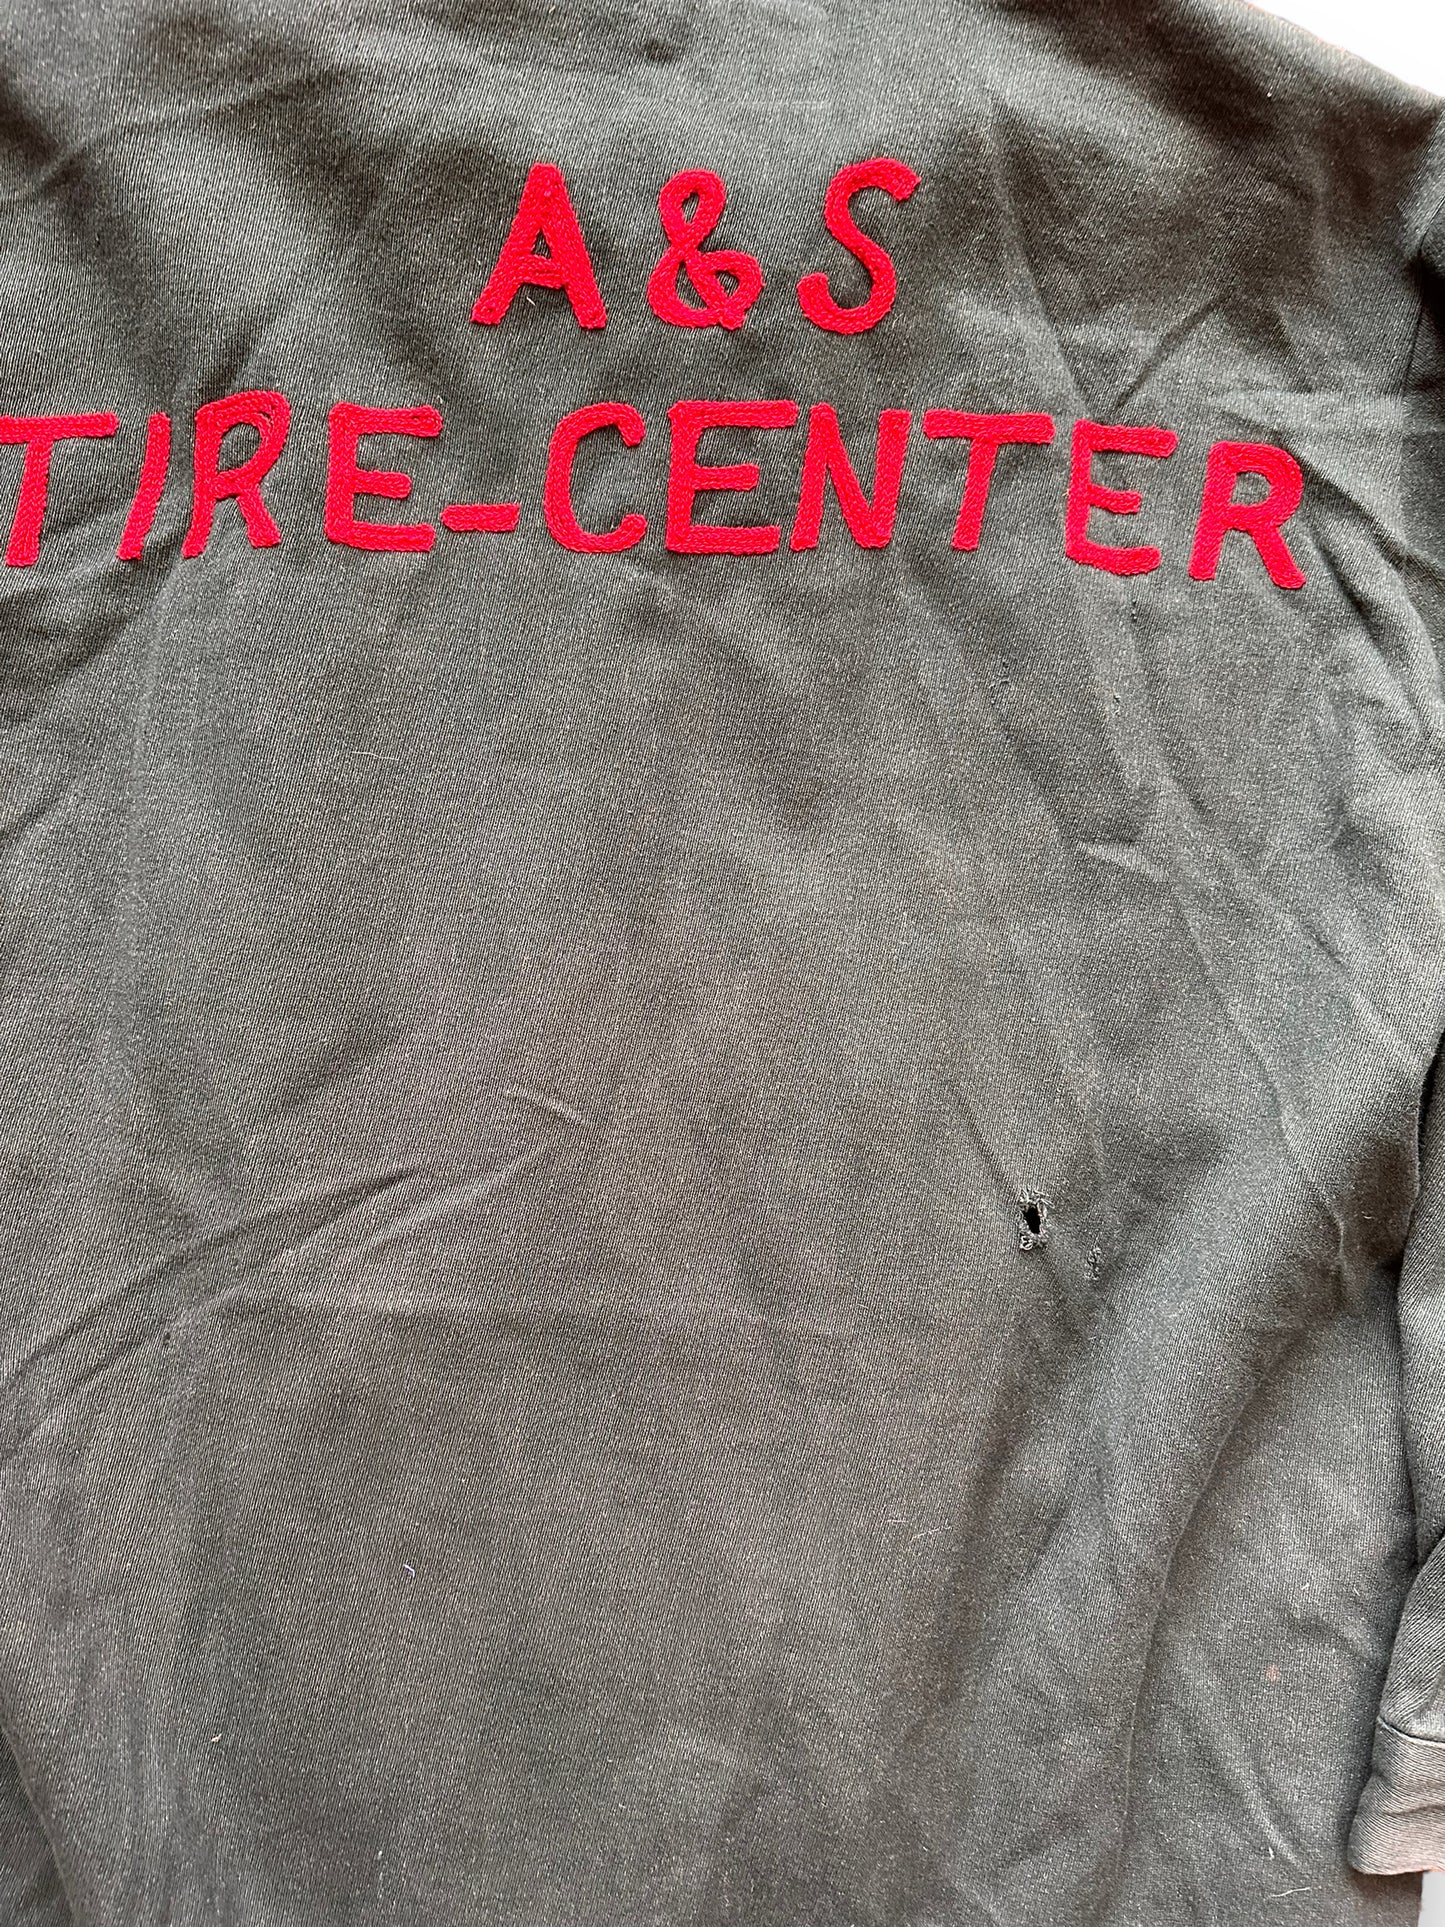 Small Hole on Rear of Vintage A & S Tire Center Chainstitched Work Shirt SZ L | Vintage Chainstitch Workwear Seattle | Barn Owl Vintage Seattle